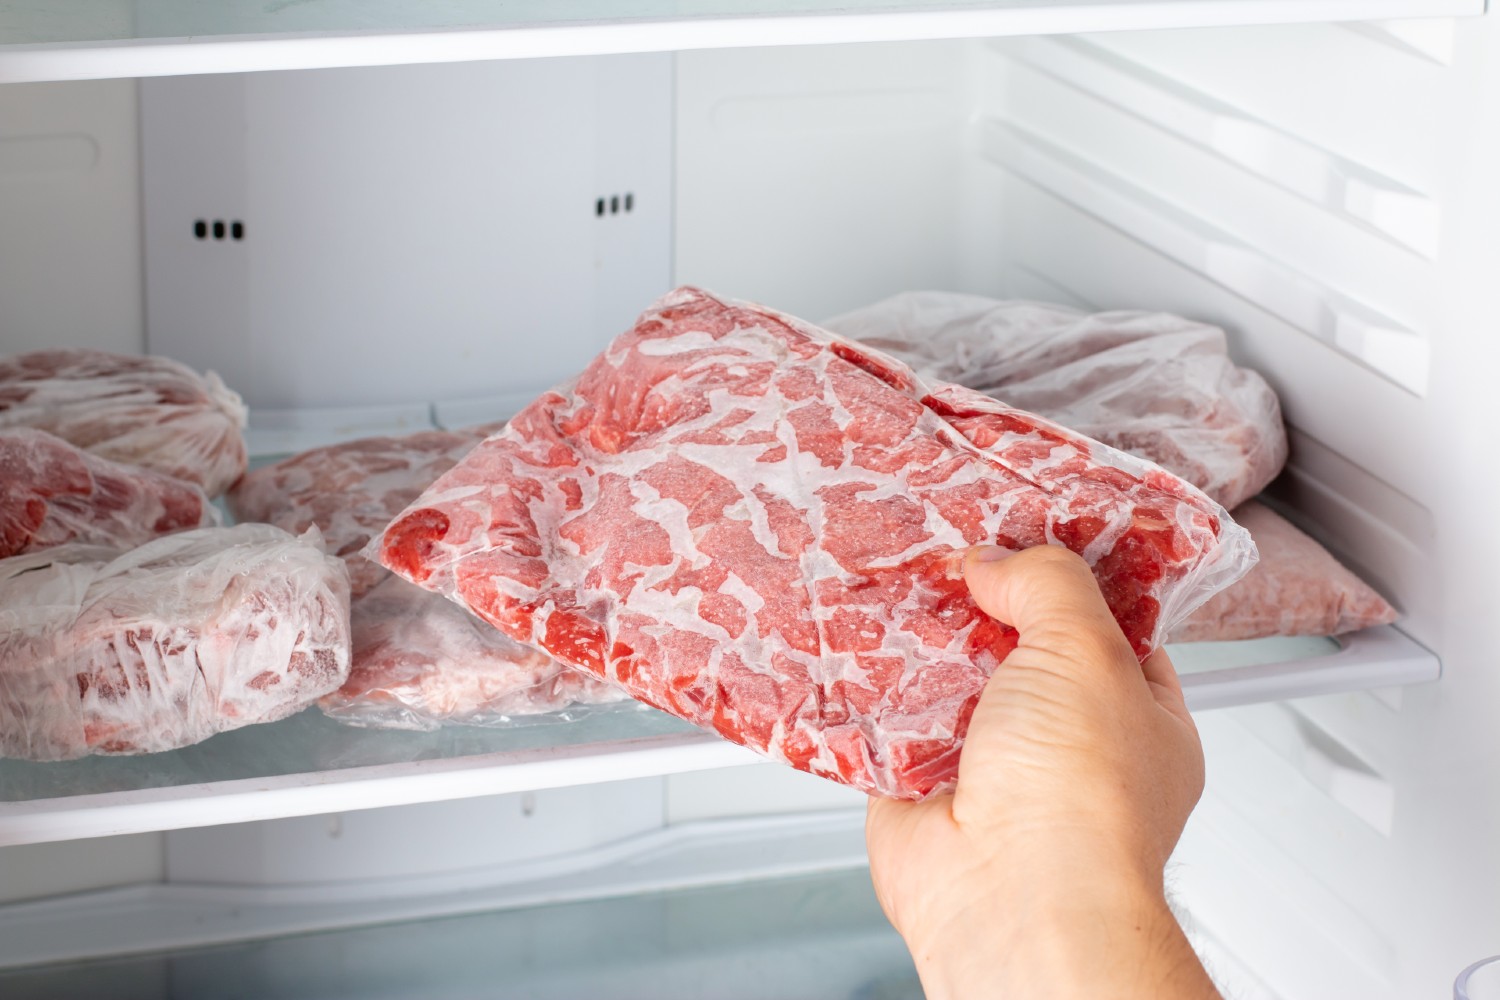 How to defrost mince quickly and safely